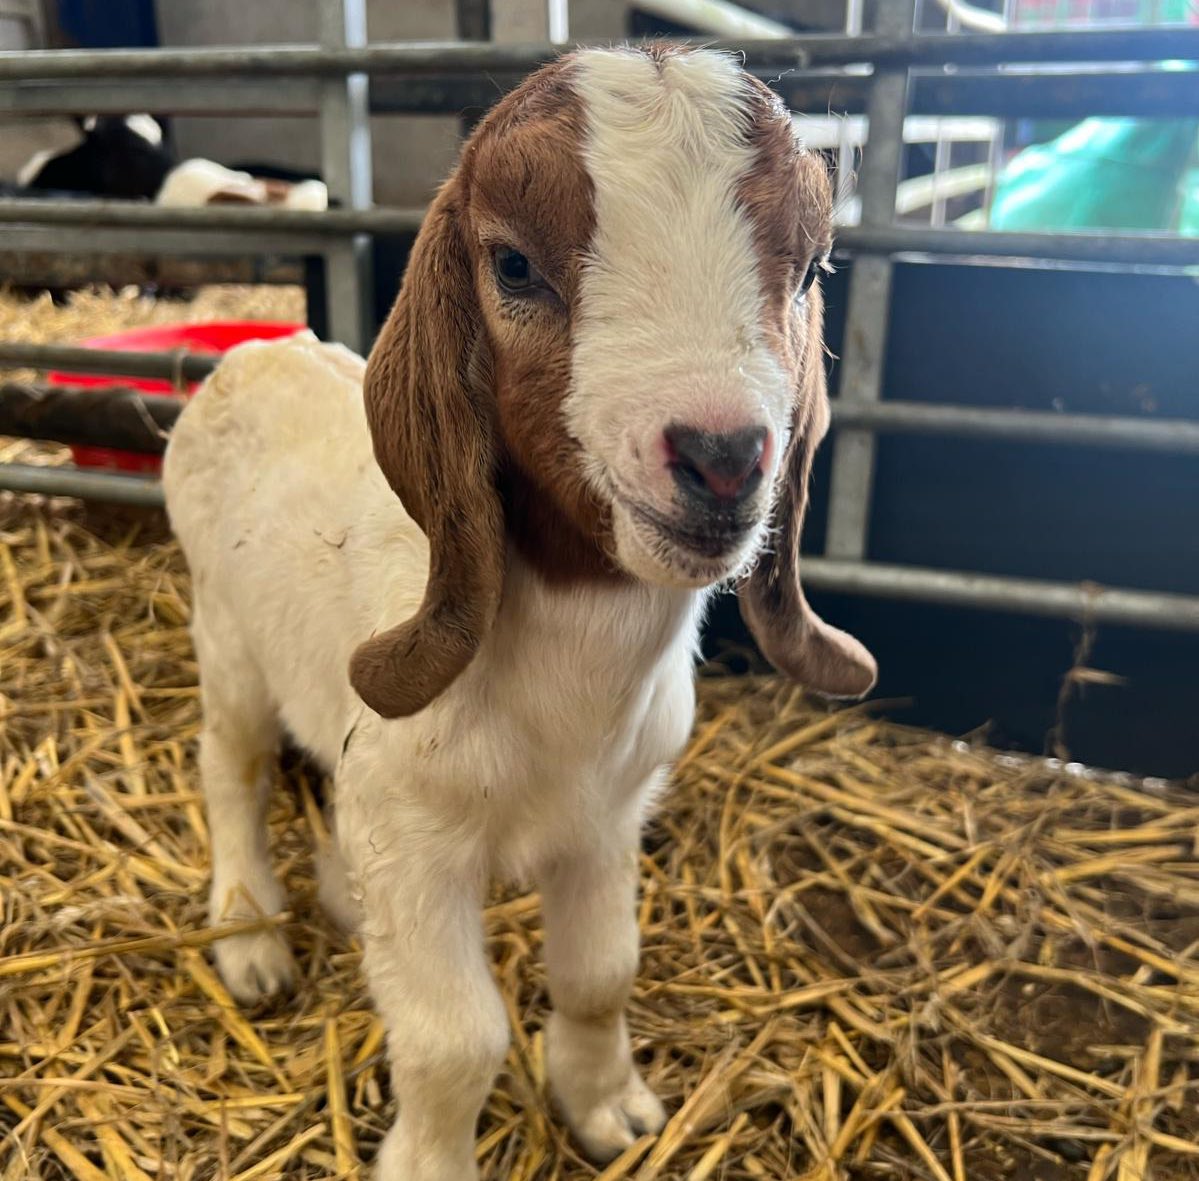 Just adding one of our cute baby goats to your feed for a little cuteness today, you’re welcome! 🥰🐐✨ Come and visit them this Feb Half Term! adventurefarm.co.uk